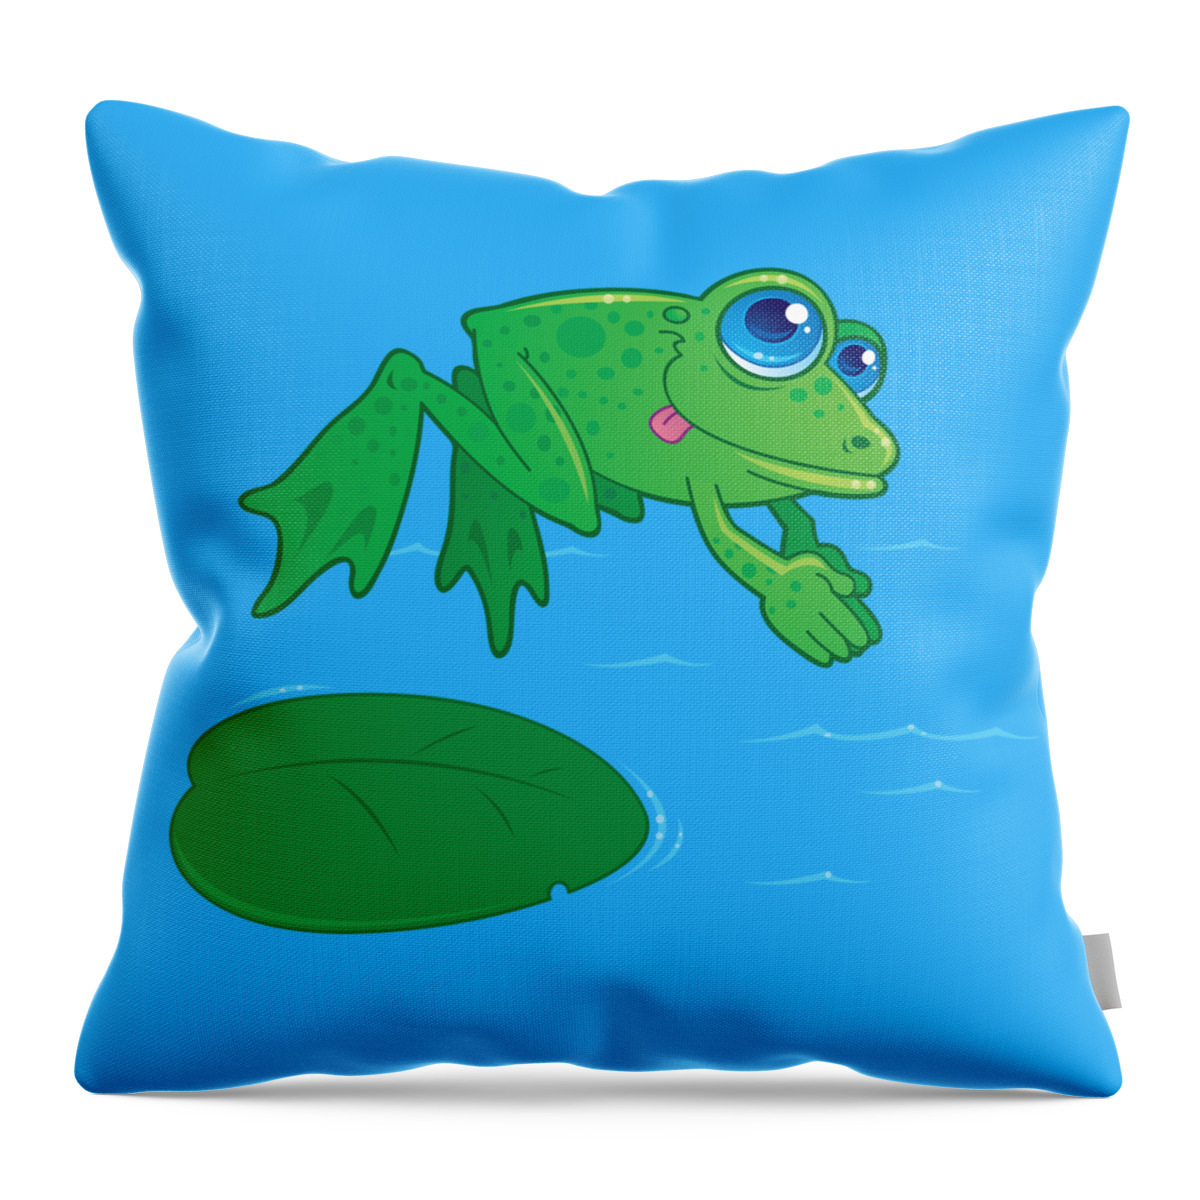 Vector Drawing Of A Cute Frog Diving Off Of A Lily Pad Into Water. Drawn In A Humorous Cartoon Style. Throw Pillow featuring the digital art Diving Frog by John Schwegel